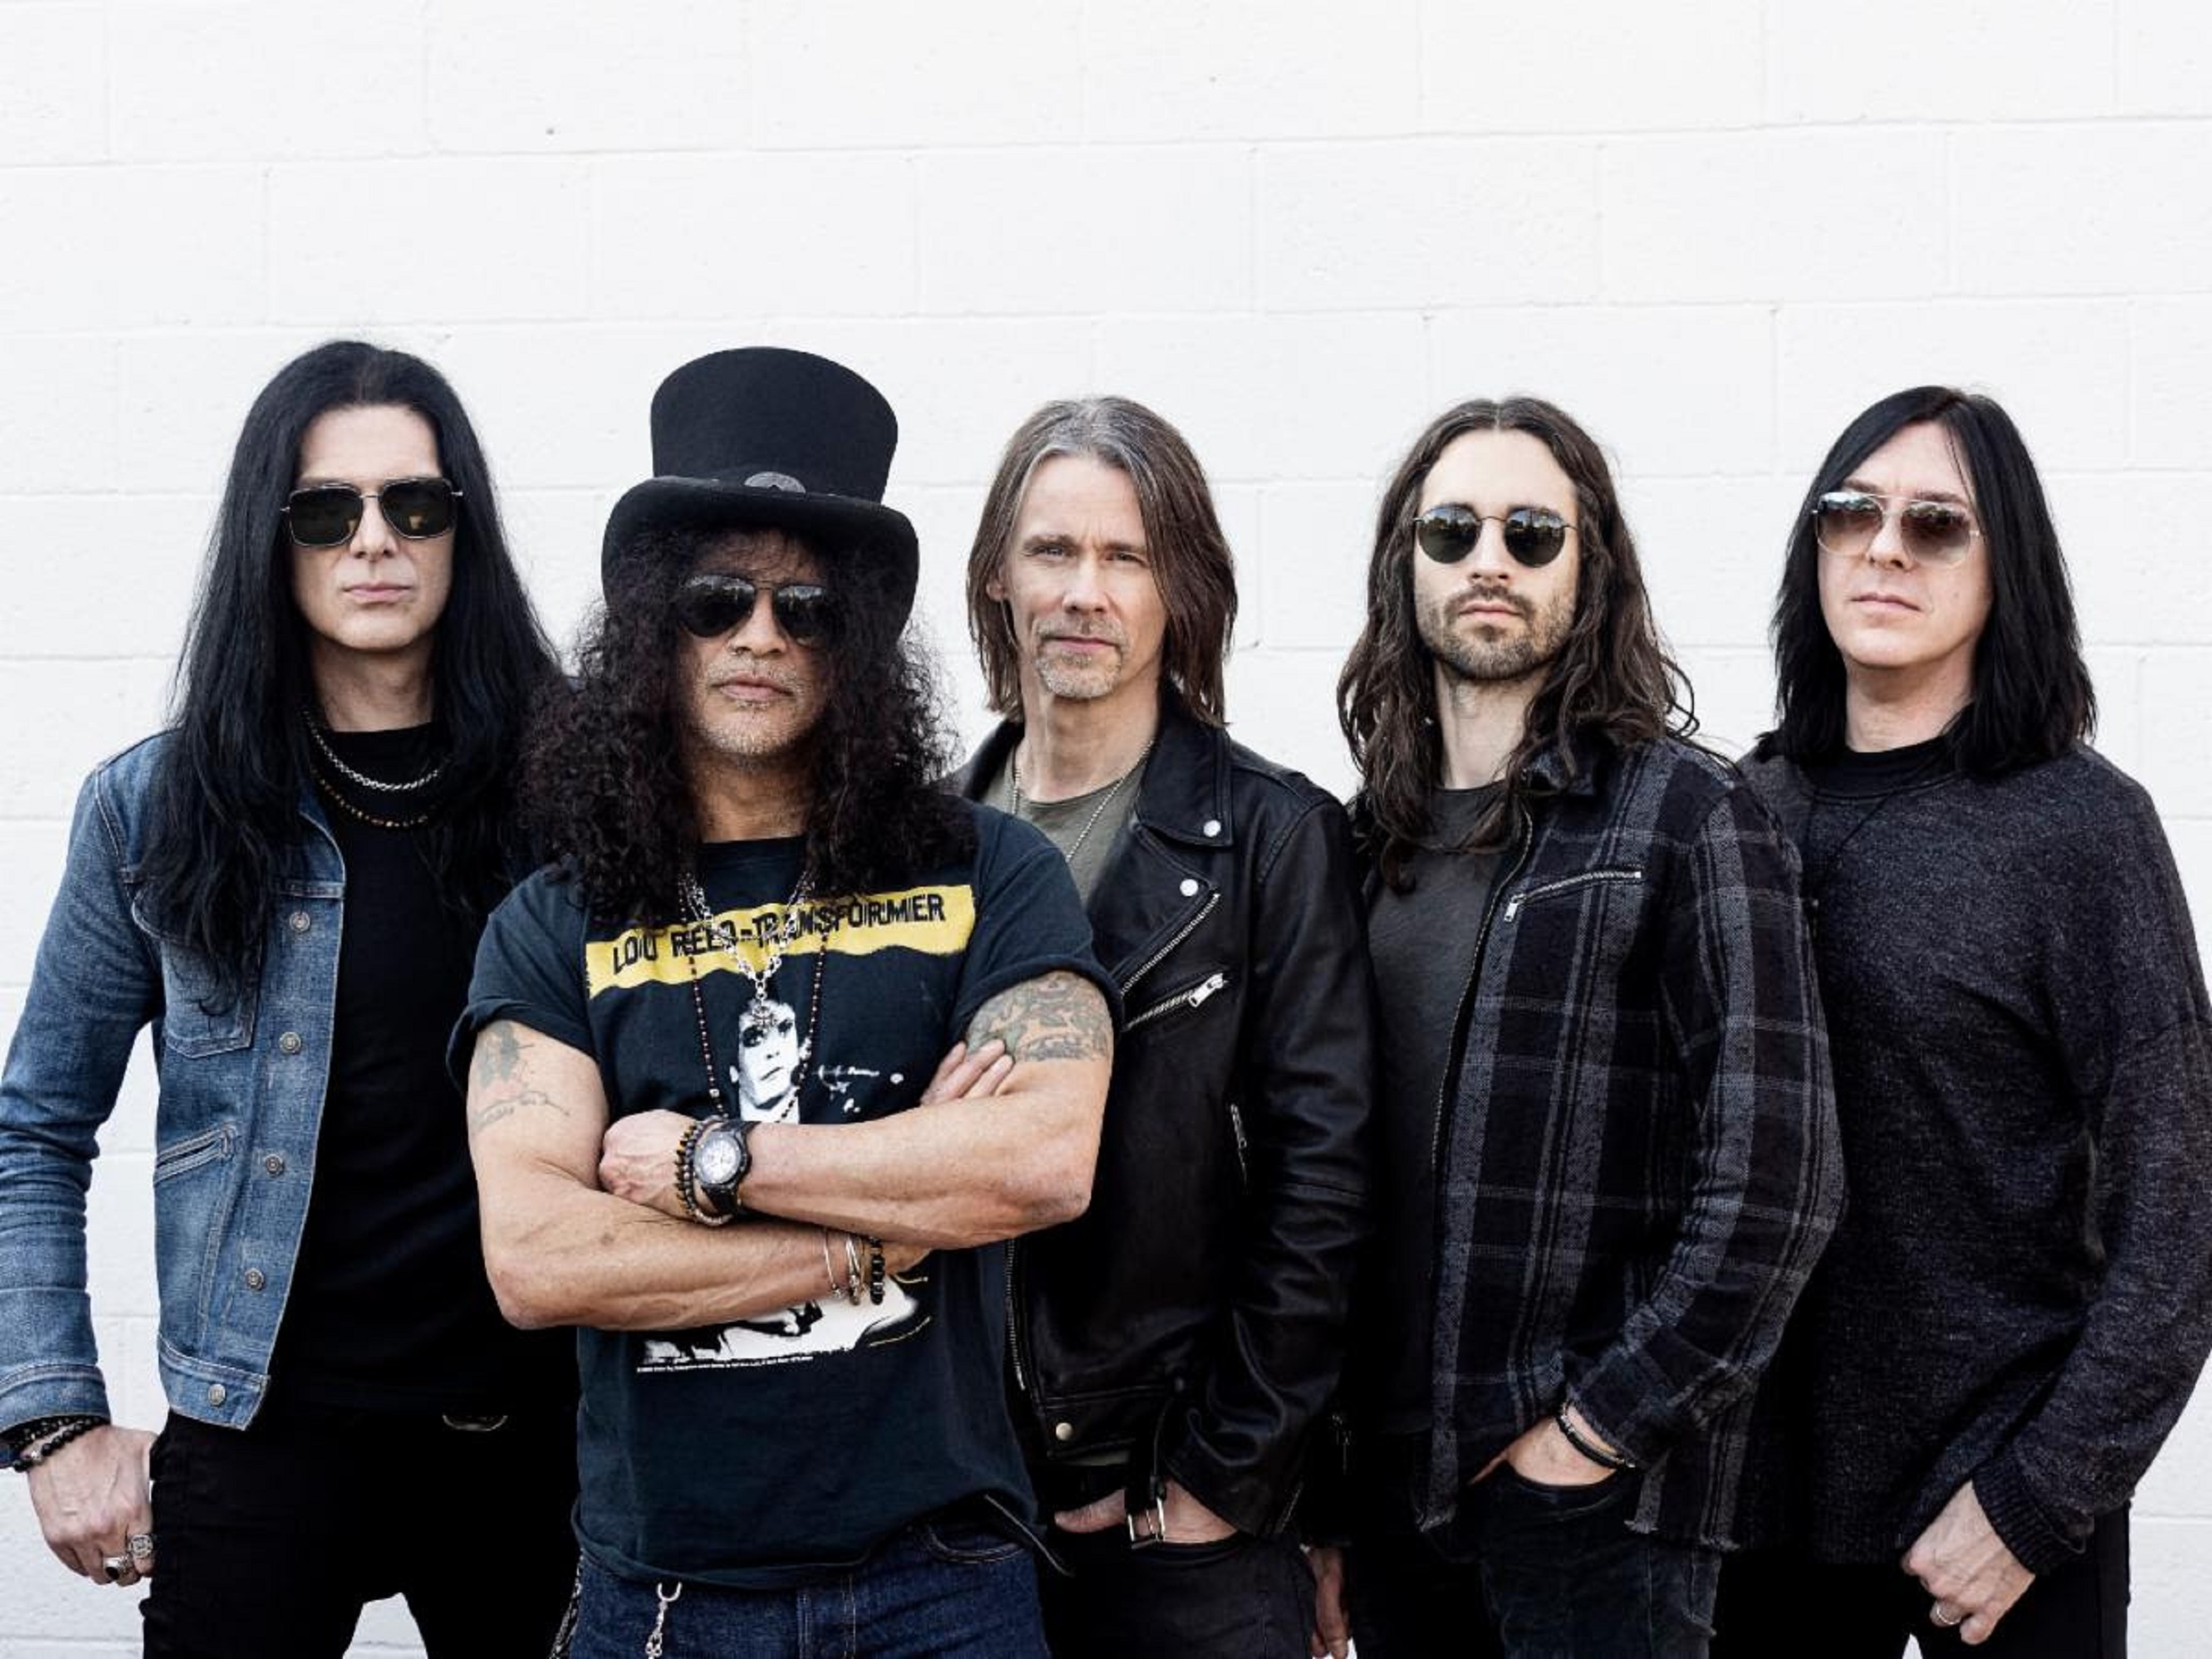 SLASH FEATURING MYLES KENNEDY AND THE CONSPIRATORS﻿ 'LIVING THE DREAM TOUR'  NOW AVAILABLE FOR PRE-ORDER — Amy Lee SLASH FEATURING MYLES KENNEDY AND THE  CONSPIRATORS﻿ 'LIVING THE DREAM TOUR' NOW AVAILABLE FOR